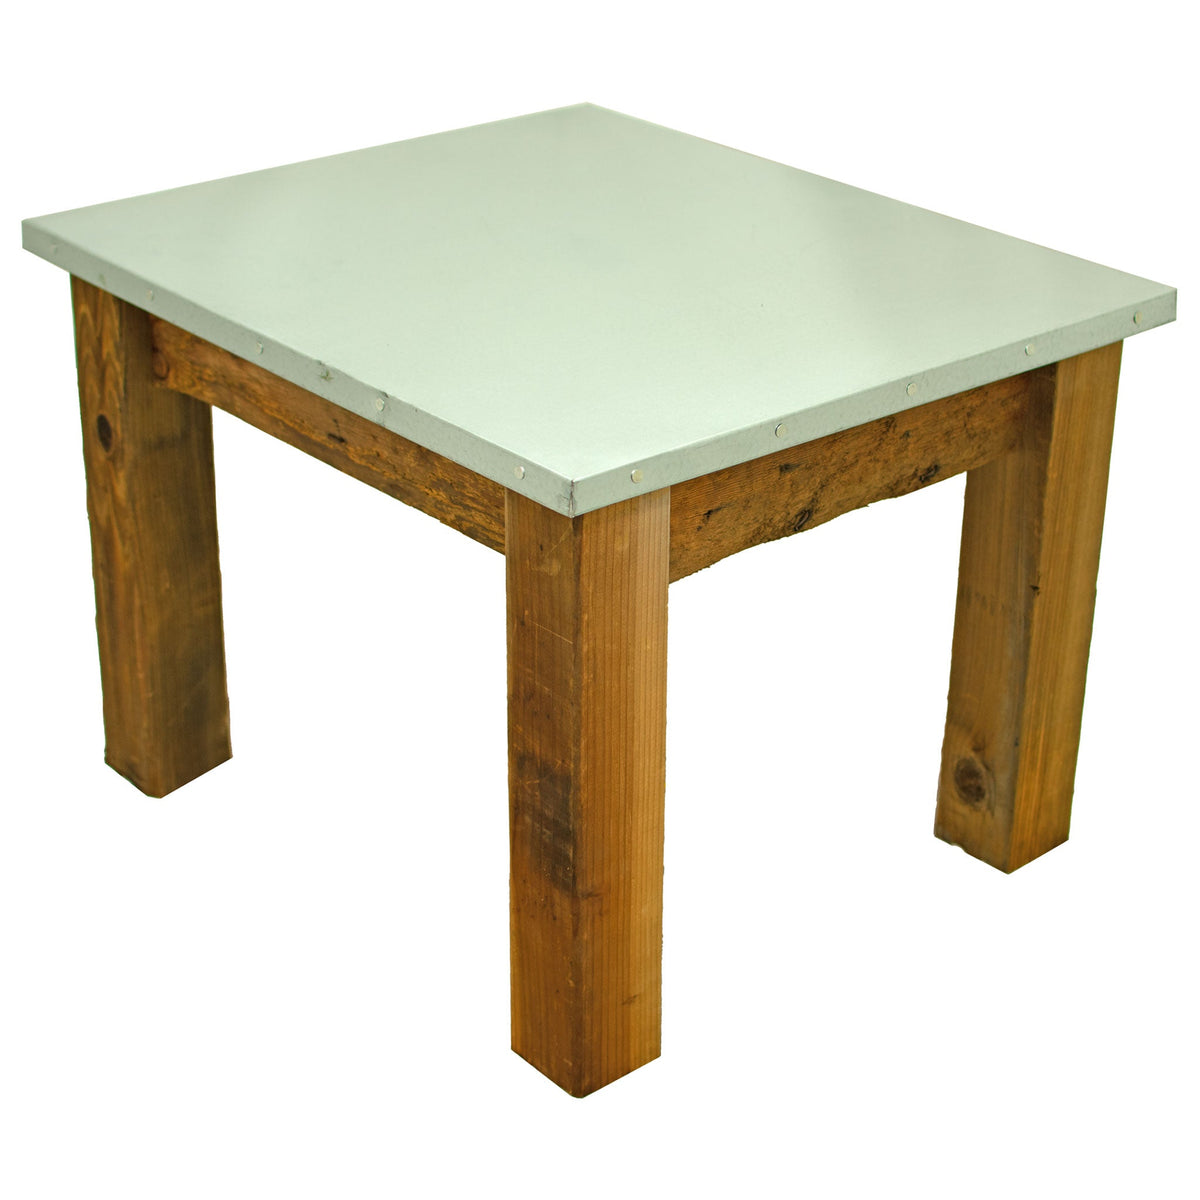 Outdoor Redwood Patio End Table on sale at Lee Display